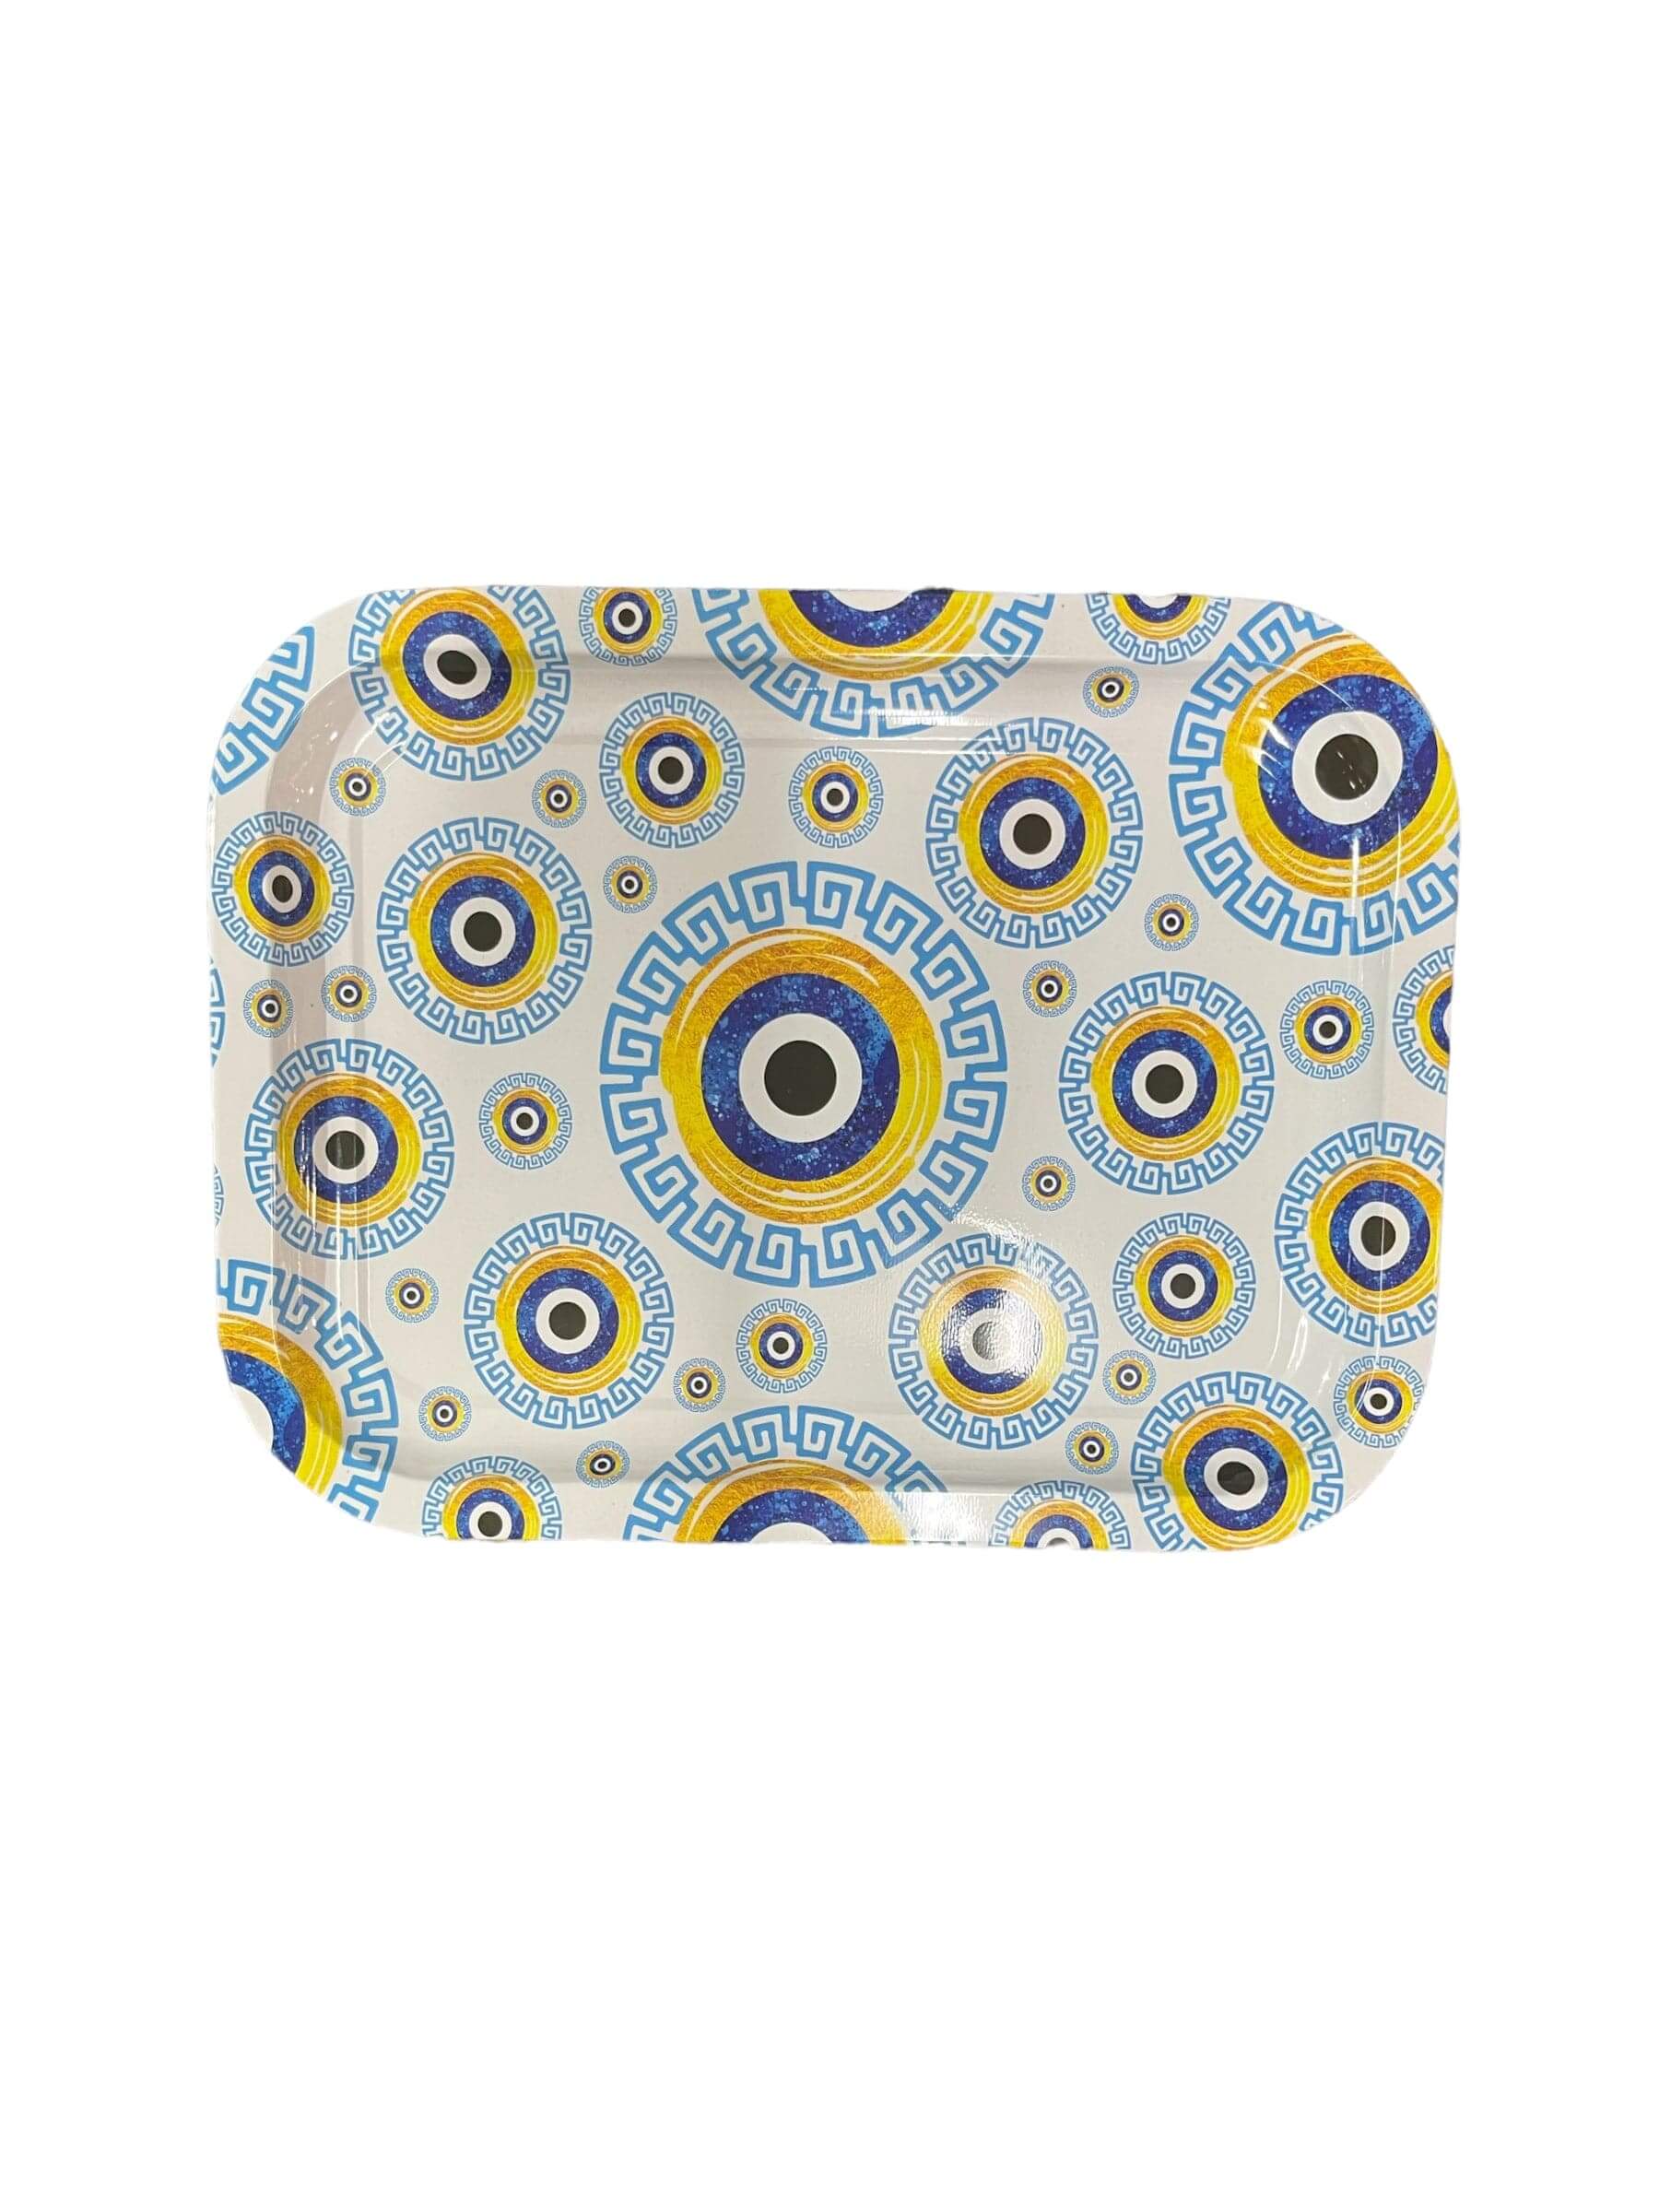 This Metal Tray Evil Eye is perfect for adding a touch of boho-chic style to your home decor. Crafted from metal, it features a distinctive evil eye motif to protect you from bad luck and health concerns. Its stylish design complements any decor, making i